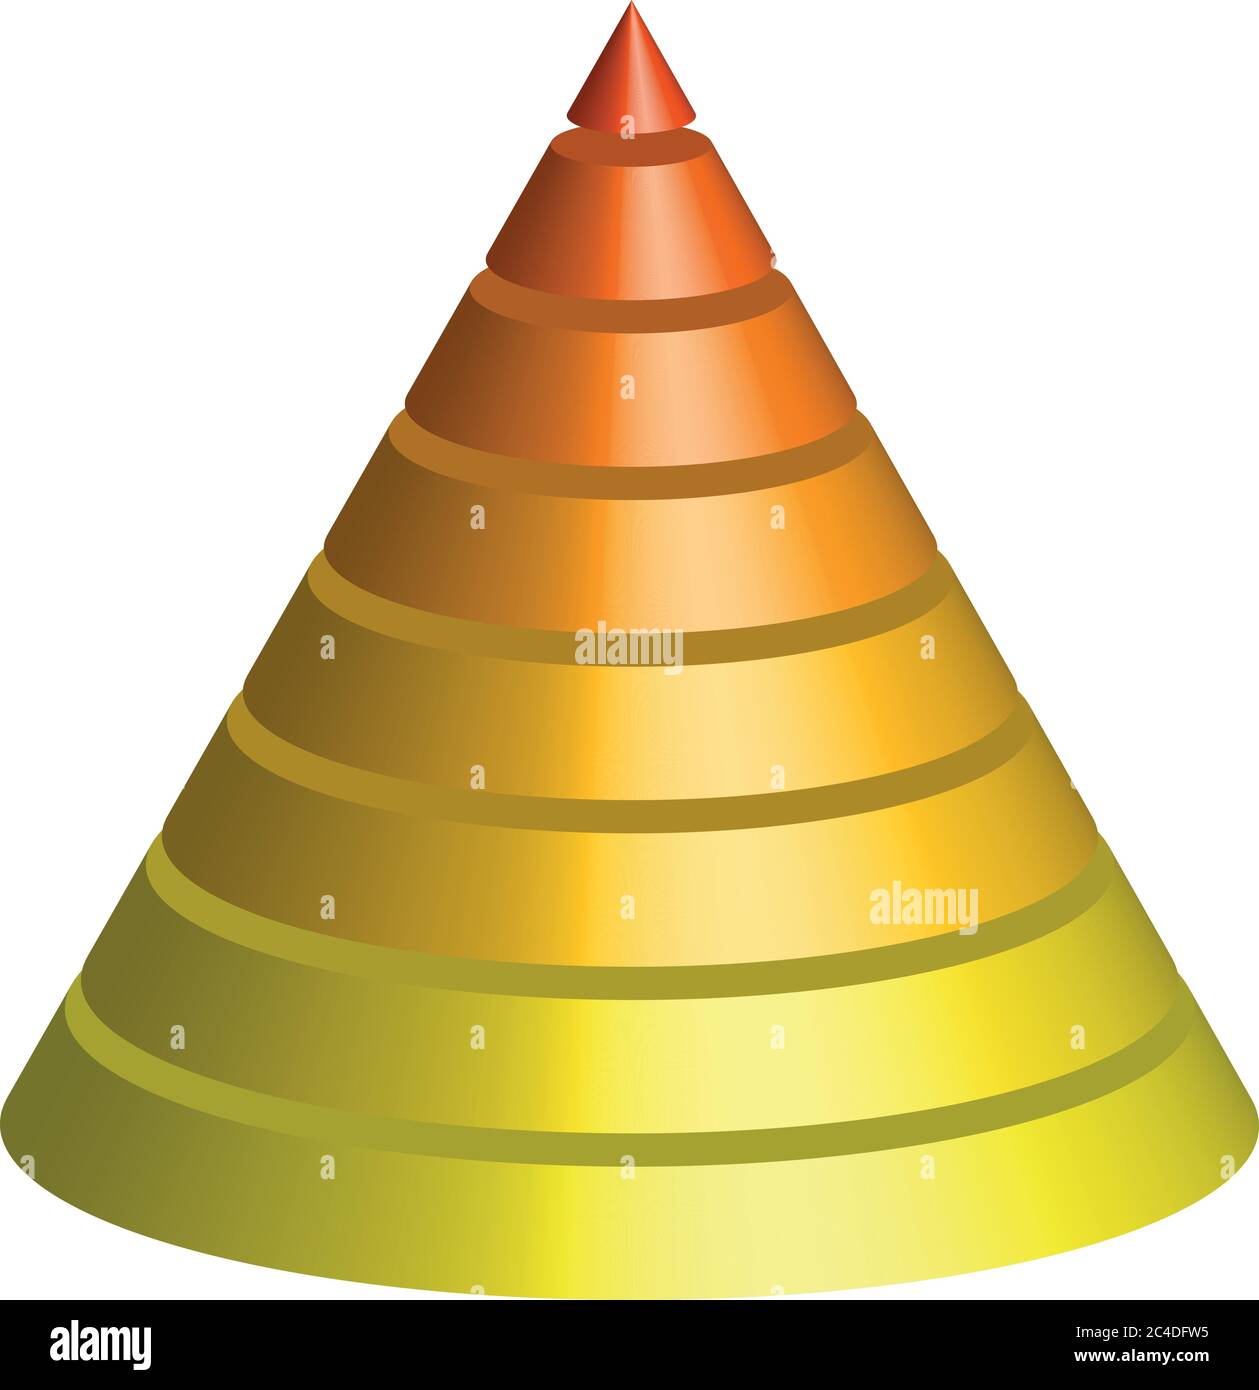 Layered cone. 3D conical pyramid of 8 multicolored layers. Vector illustration. Stock Vector